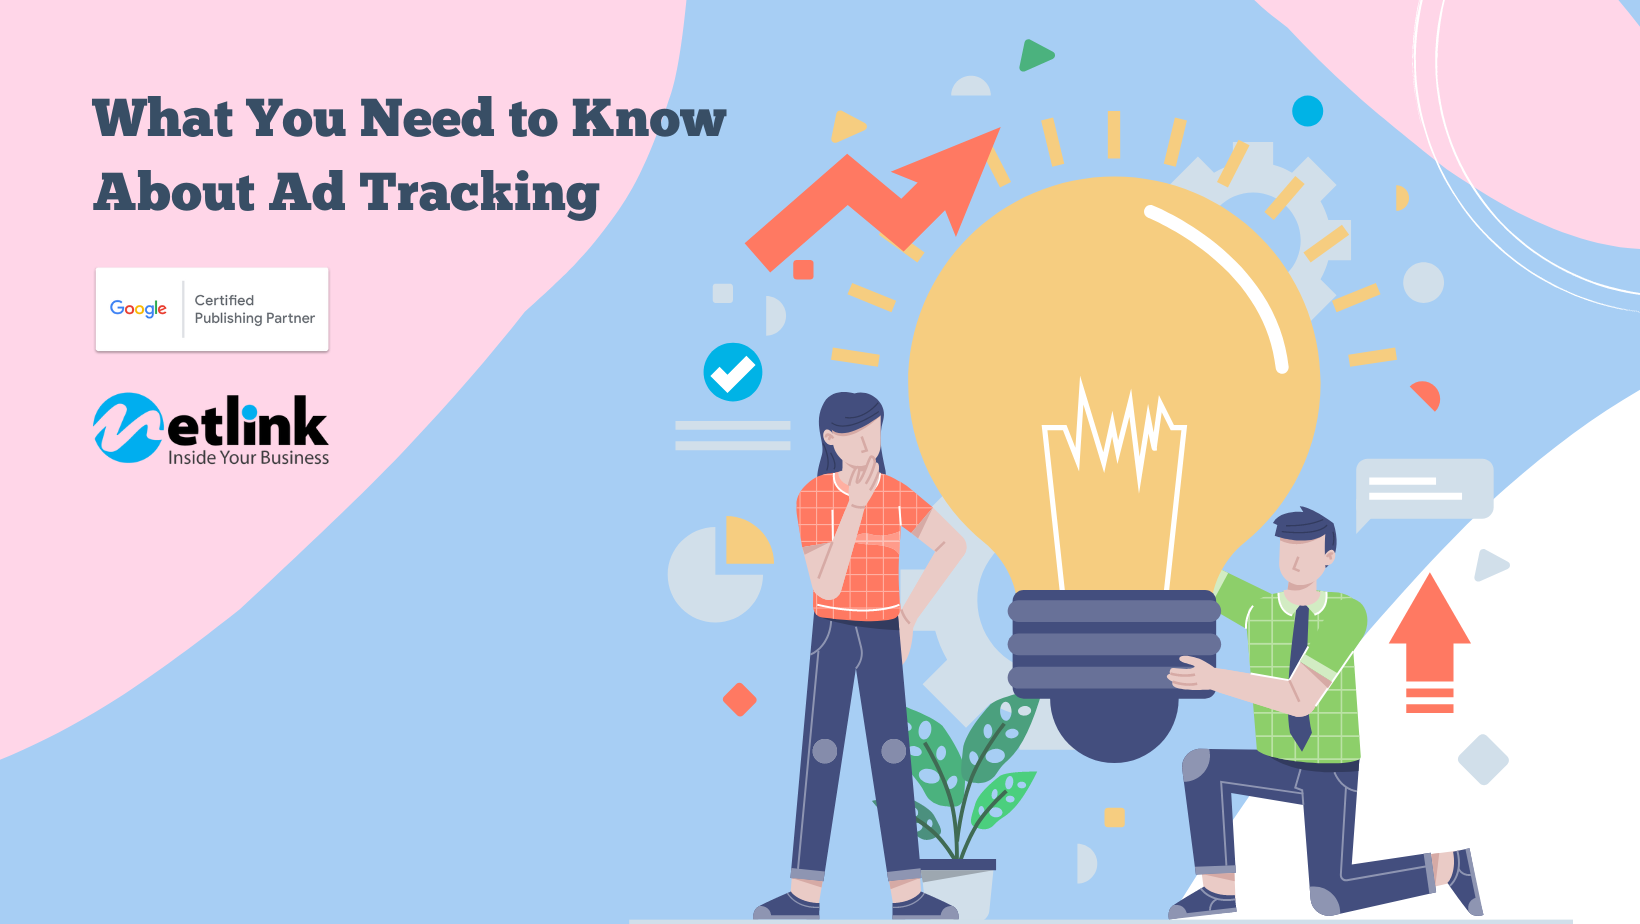 What You Need to Know About Ad Tracking